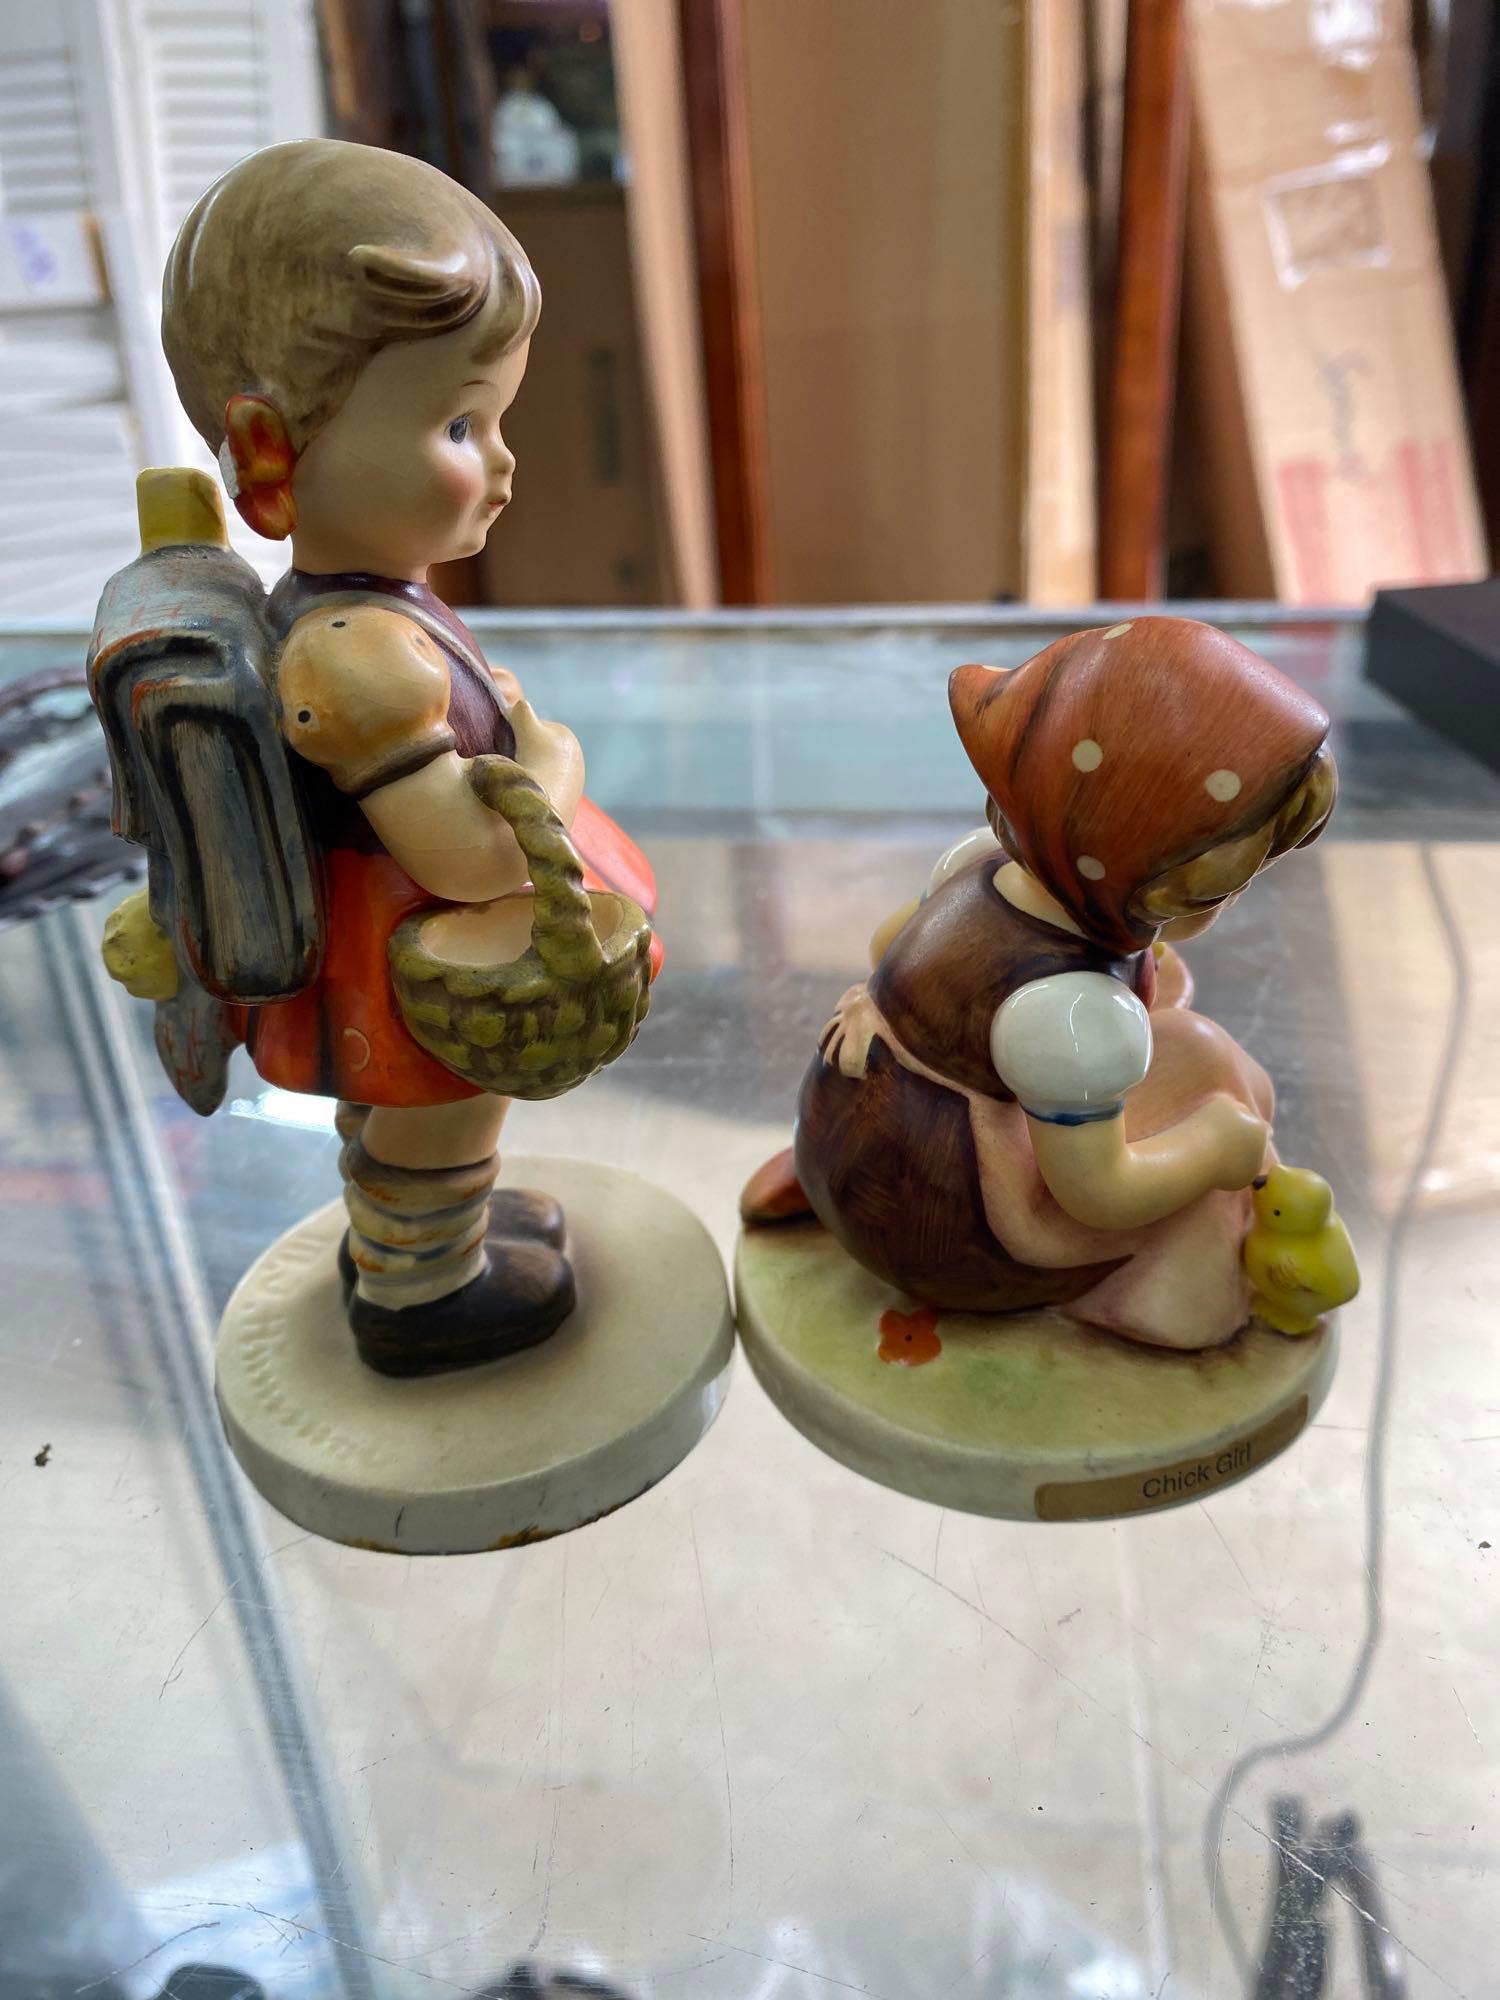 2 Authentic German Hummel figurines Chick Girl and School Girl